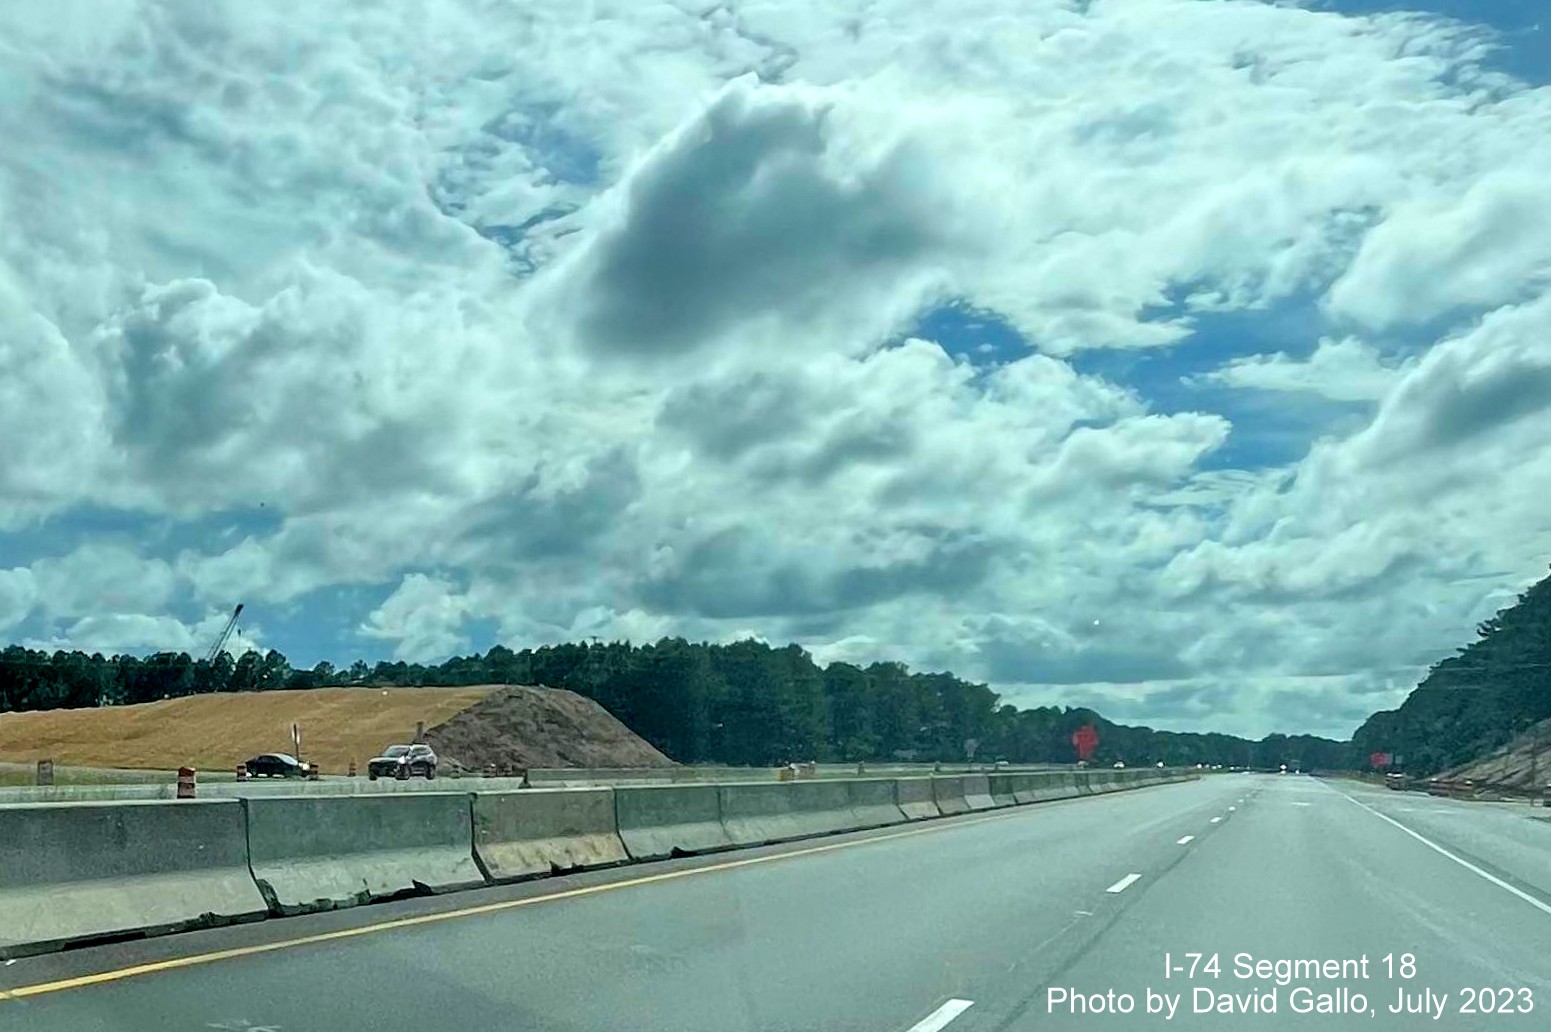 Image of landscaping underway for new bridge for Lake Waccamaw exit at Chauncey Town Road on US 74/76 (Future I-74) East, David Gallo, July 2023